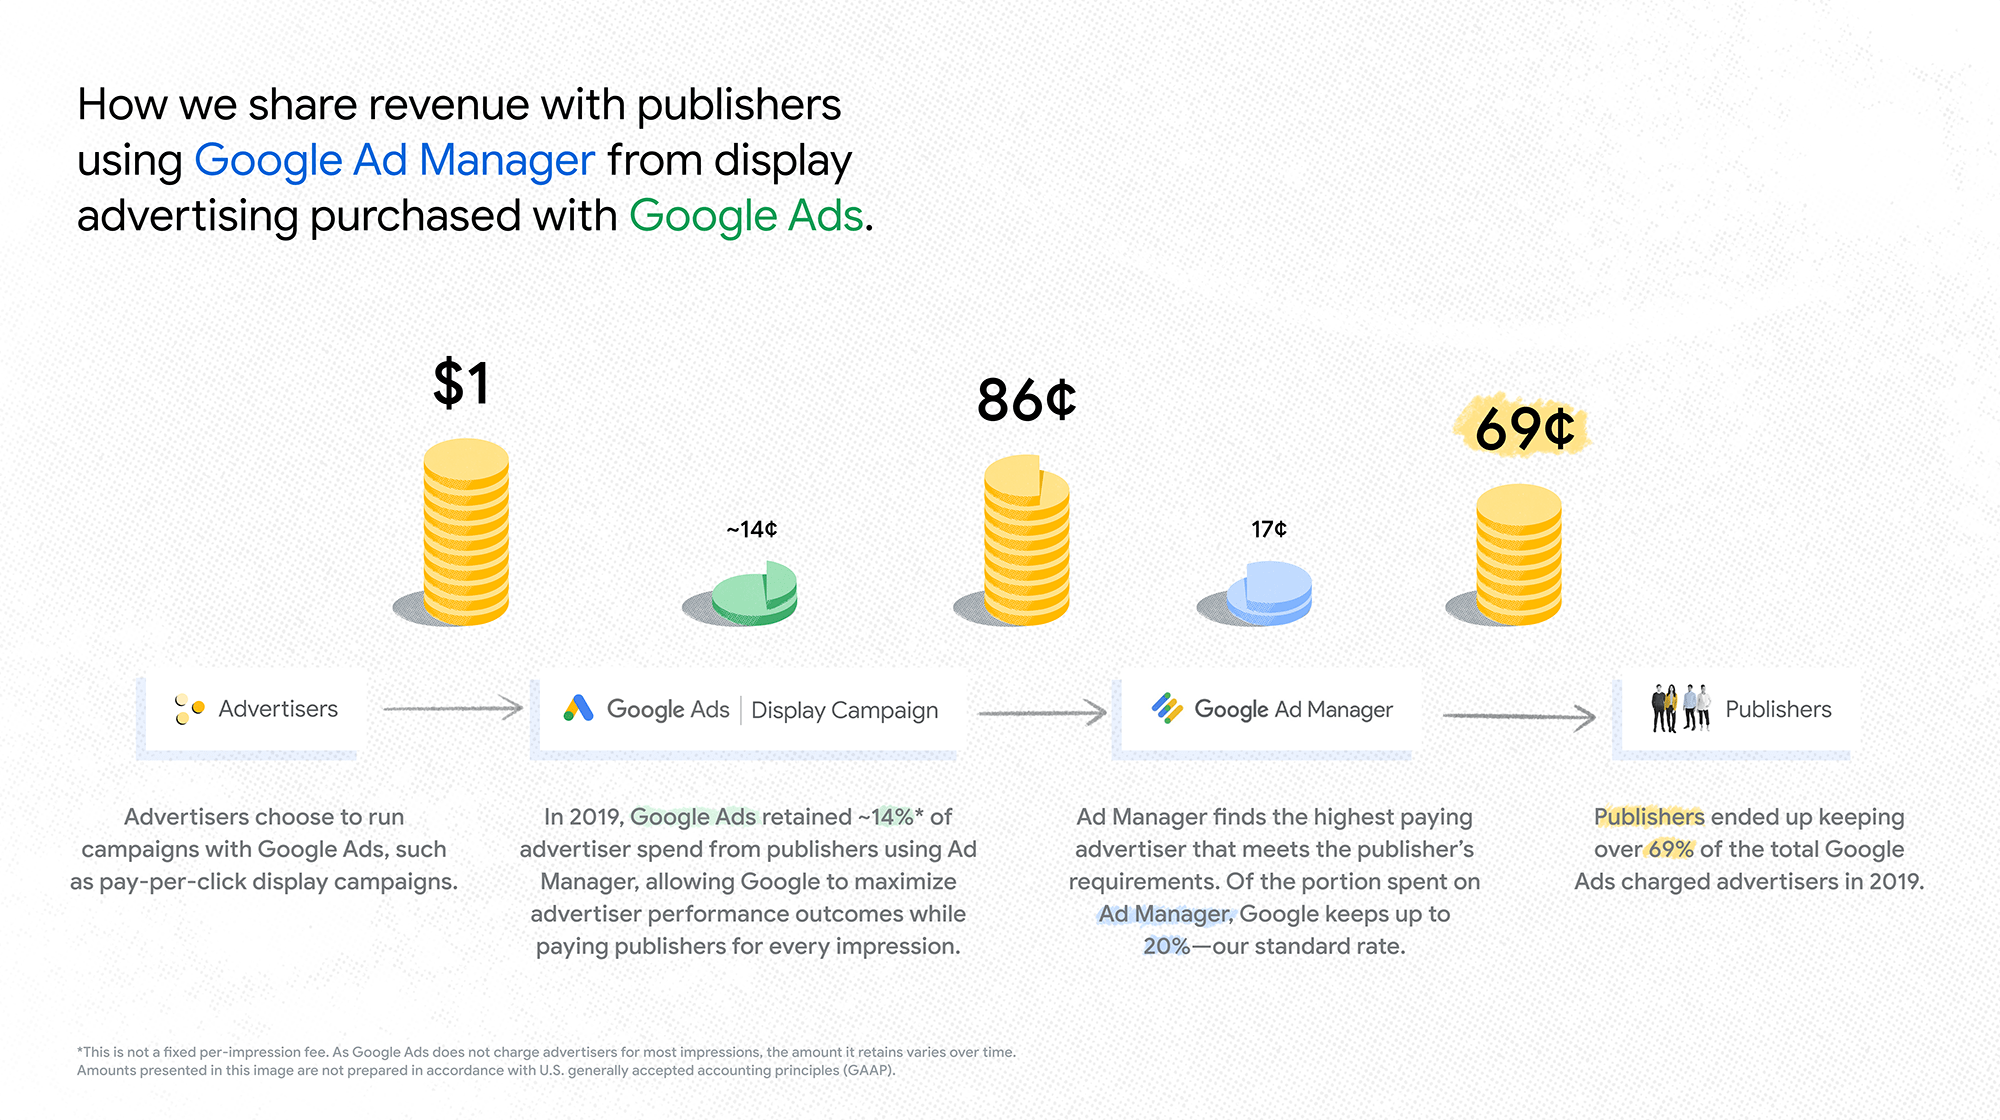 Google fee structure - Google ads to Google ad manager